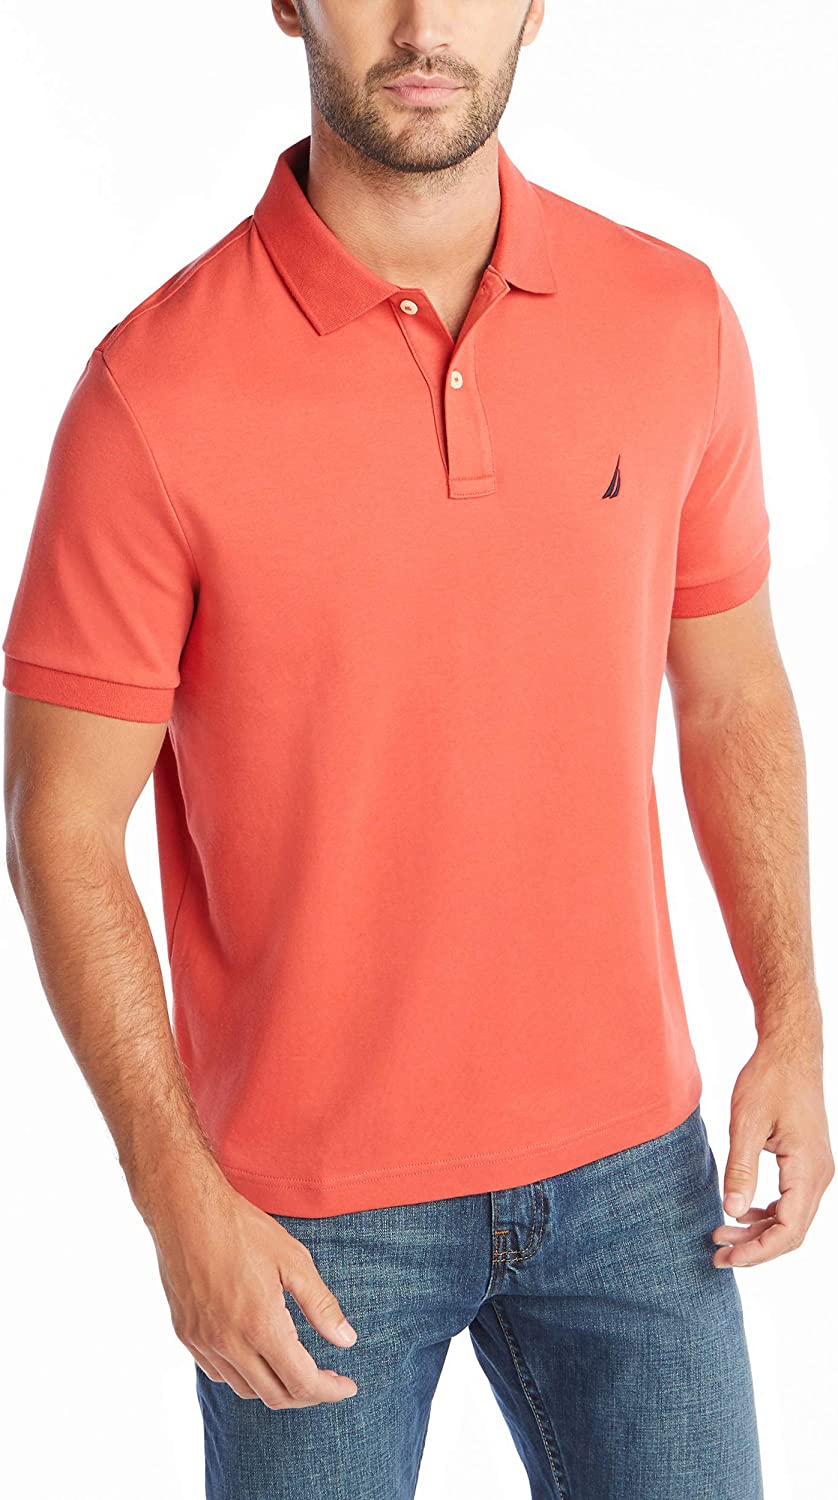 Coral Sands Nautica Mens Classic Fit Short Sleeve Solid Soft Cotton Polo Shirt 4X